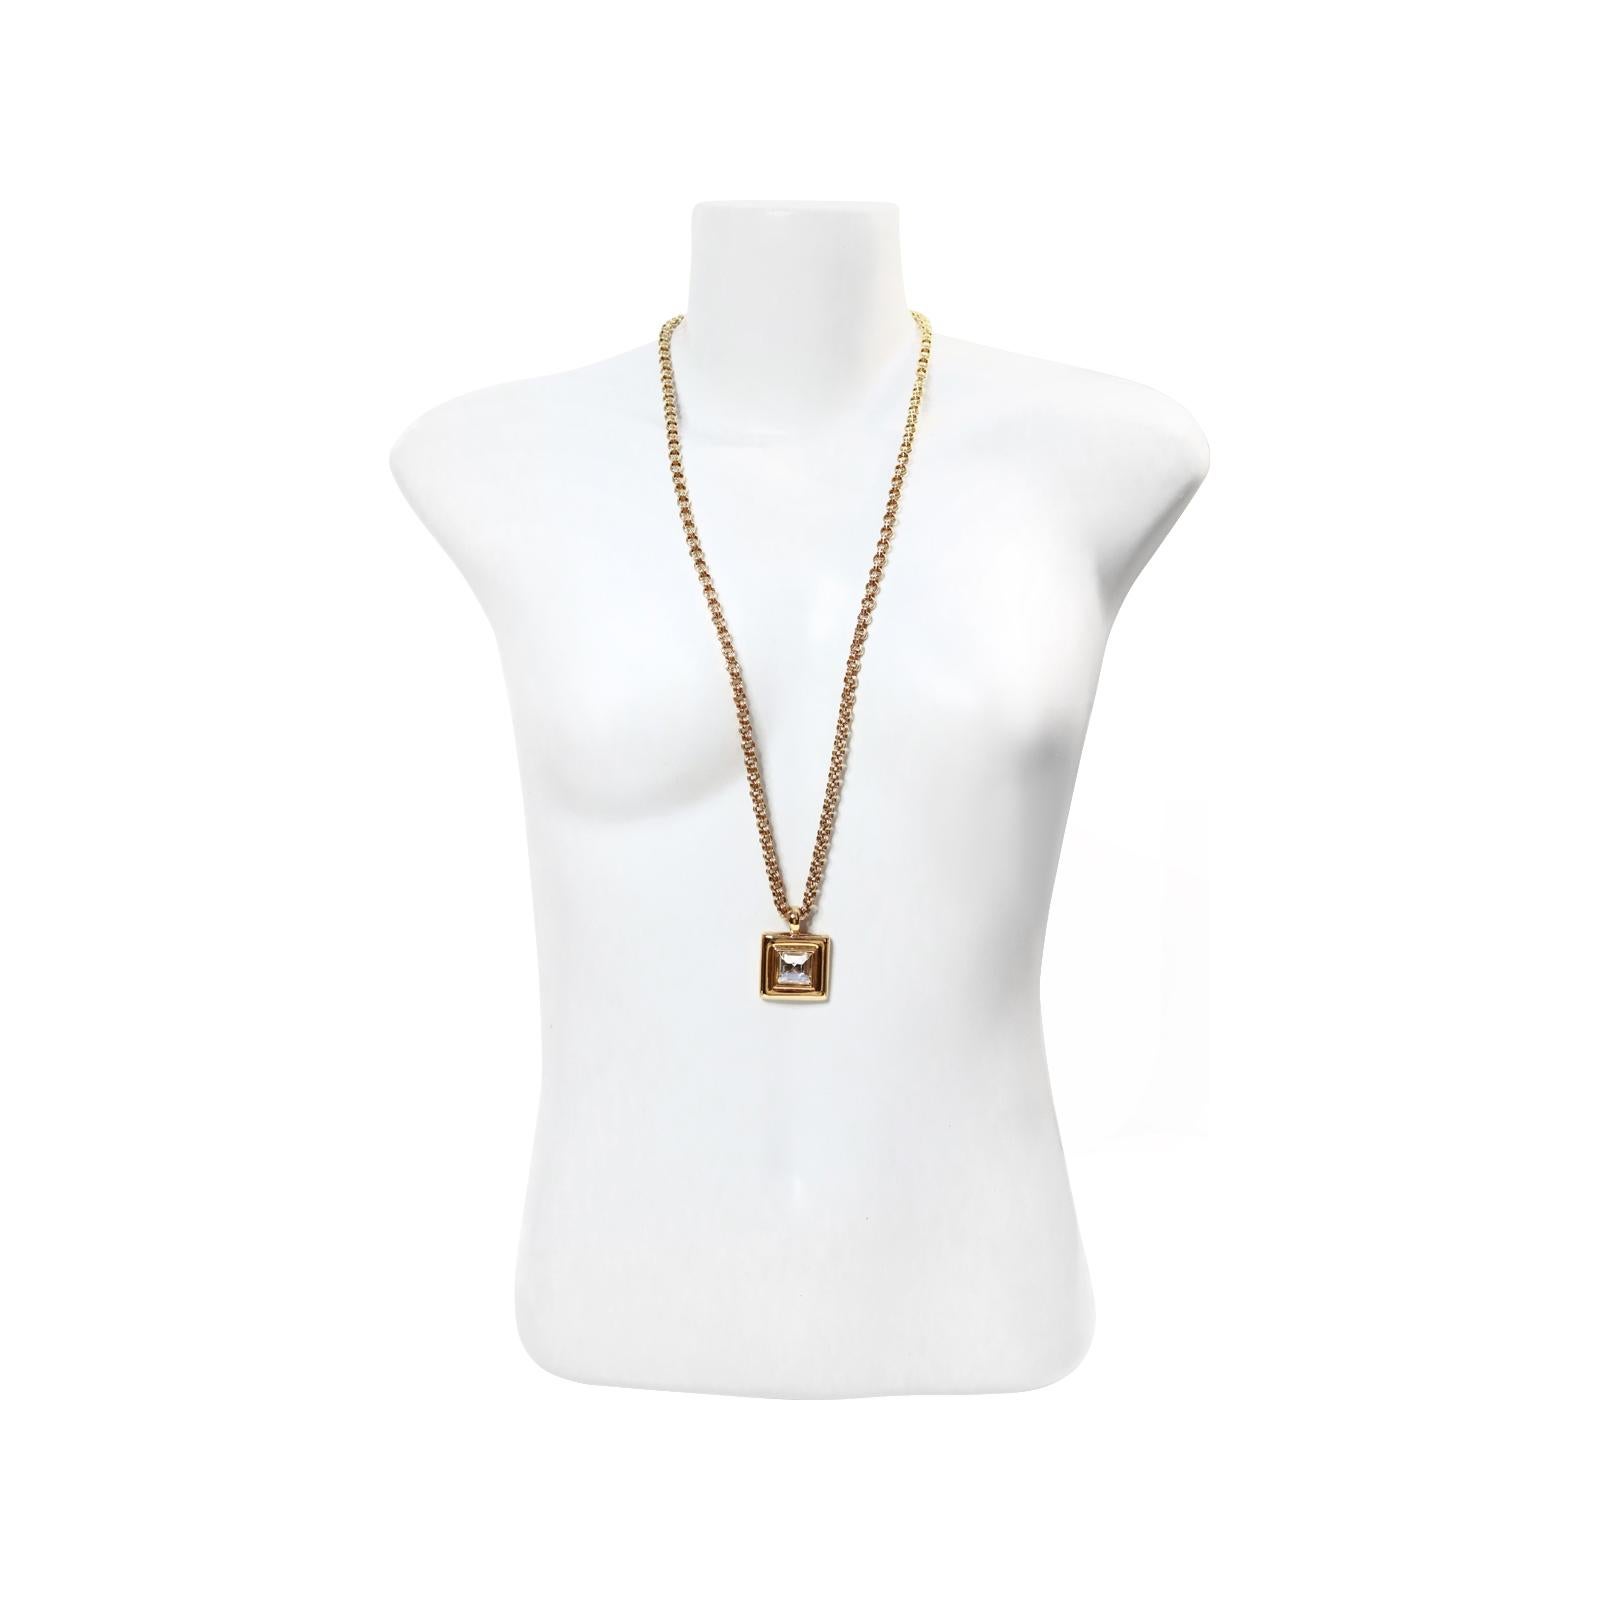 Vintage Givenchy Link Chain with Dangling Drop Necklace Circa 1980s For Sale 4